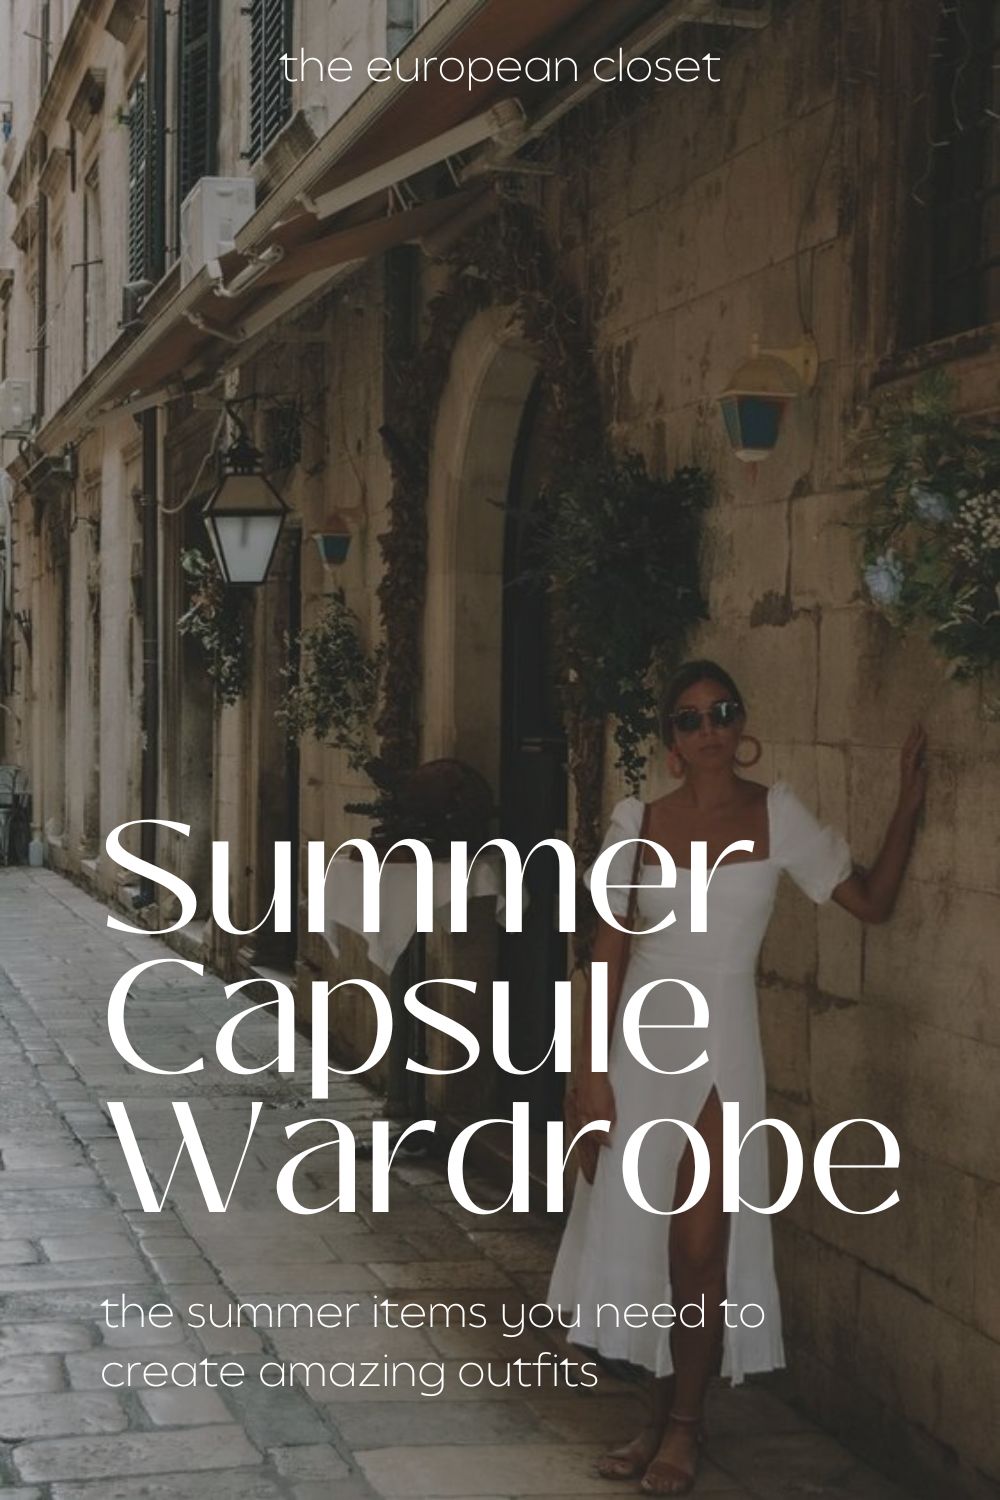 If you're looking to cretae your very own summer capsule wardrobe but don't know where to start, this post is perfect for you.